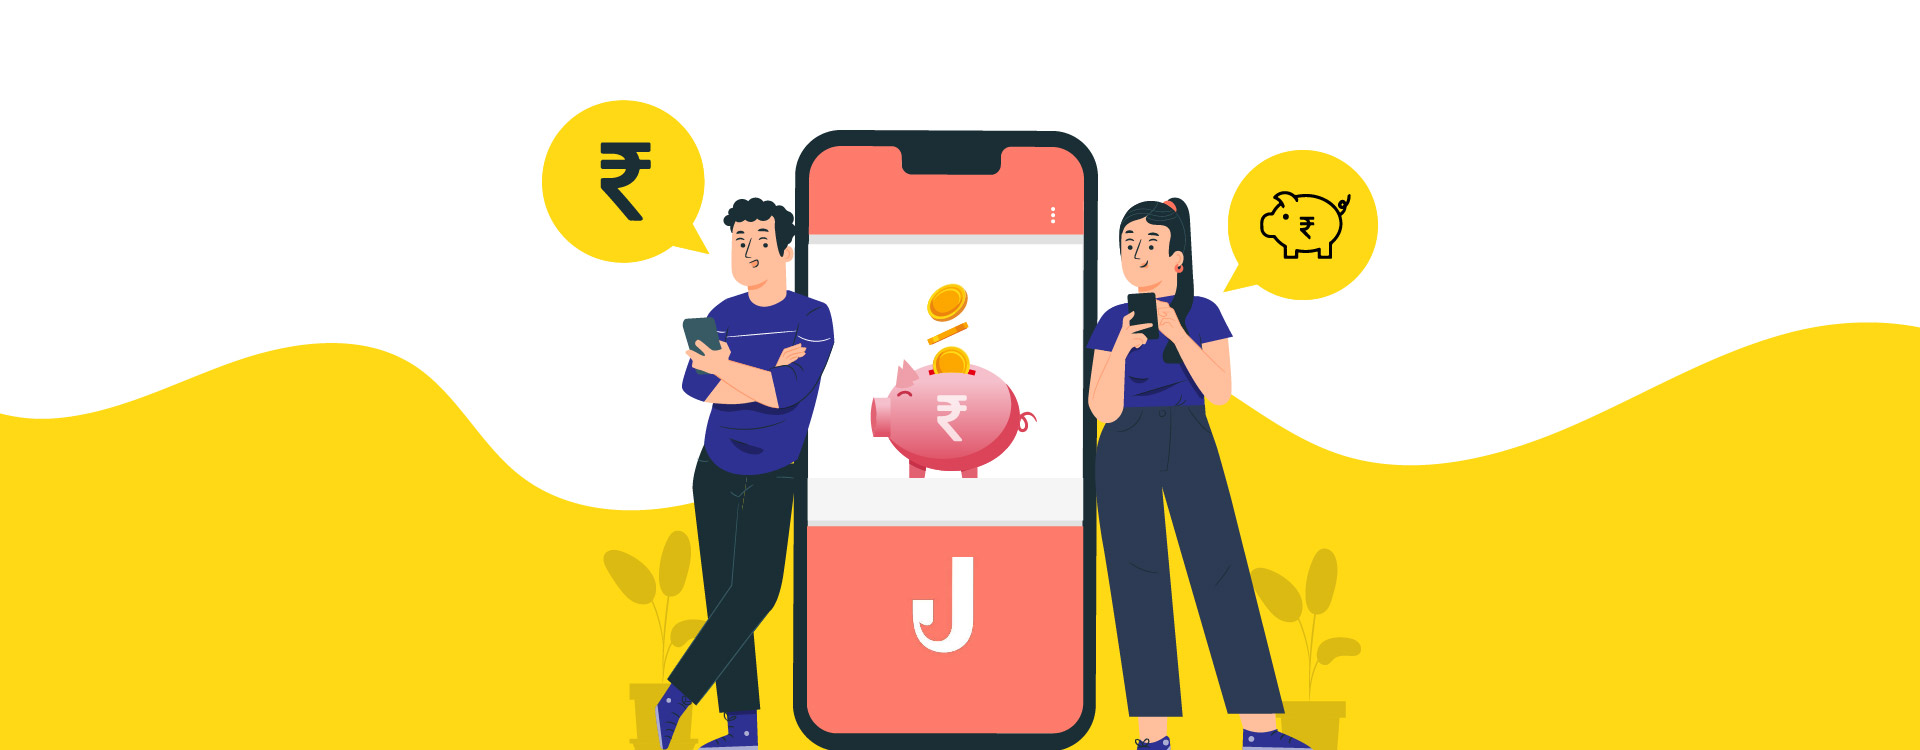 Jupiter is a new fintech app which will be a millennial's go-to-banking app.